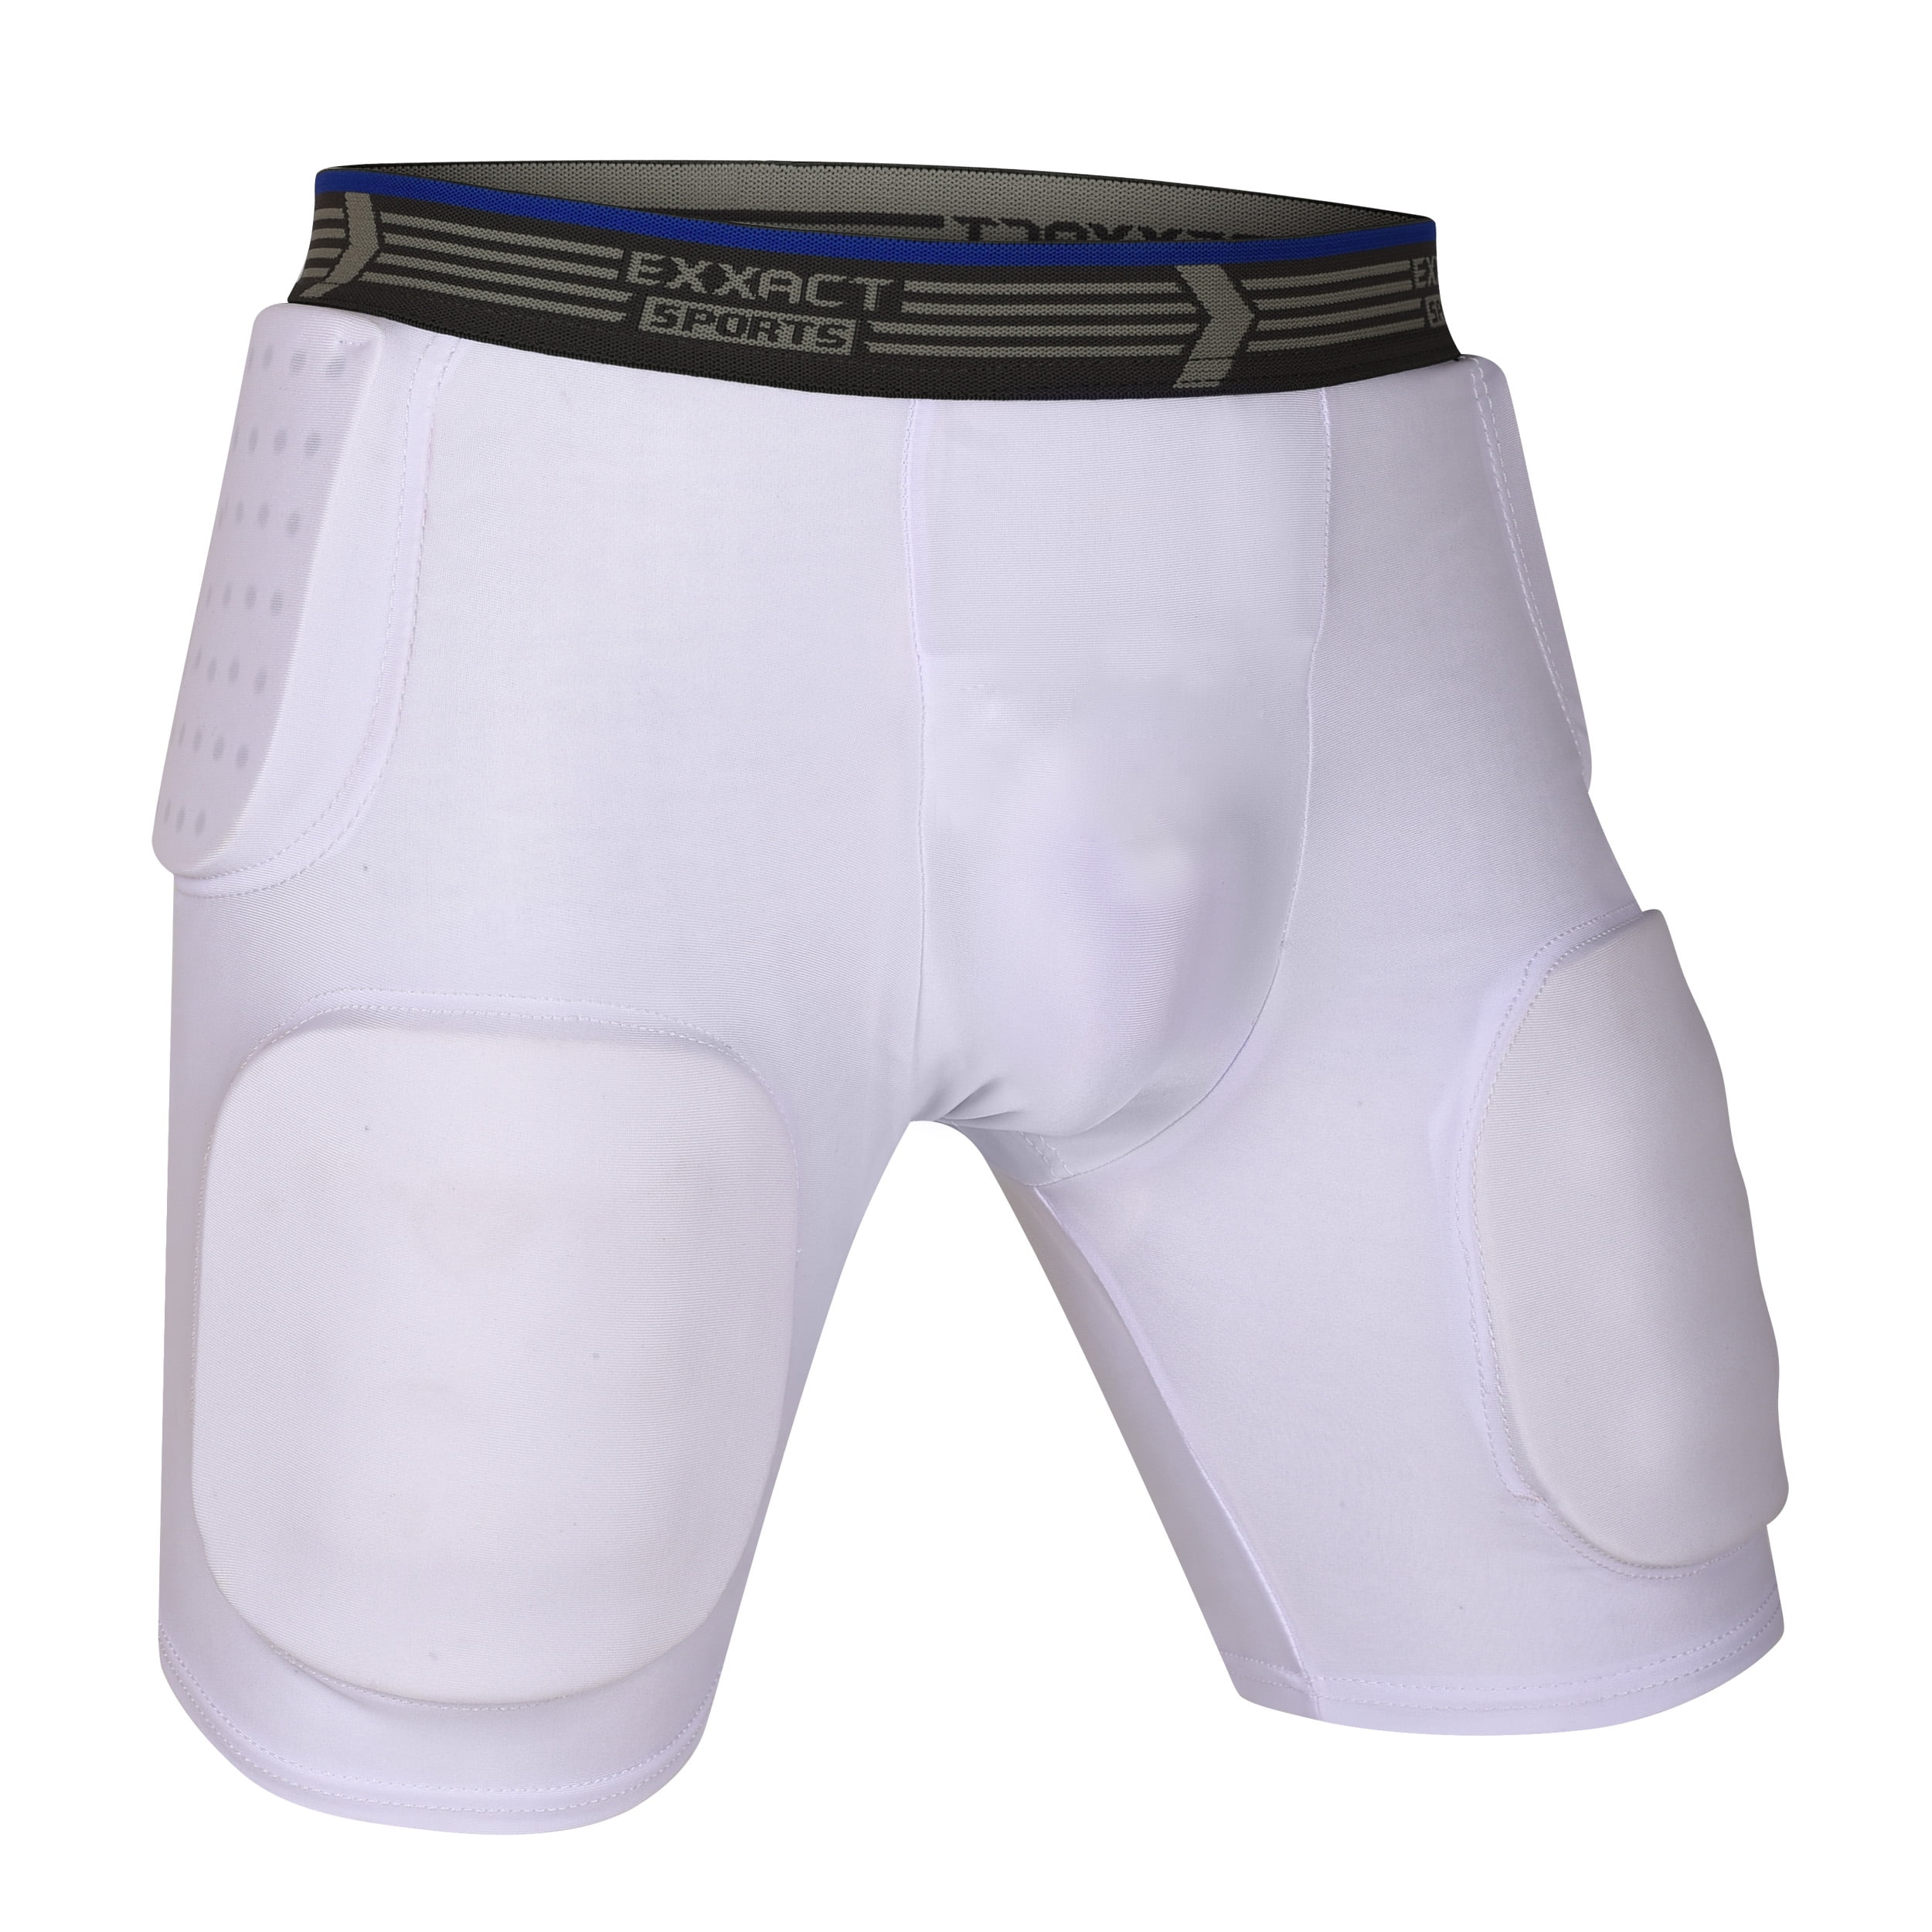 Exxact Sports Rebel 5-Pad Youth Football Girdle w/ Integrated Hip, Thighs  and Tailbone Pads, w/ Cup Pocket | Compression, Integrated and Protective Football  Pads (Youth) (Youth Medium) - Walmart.com